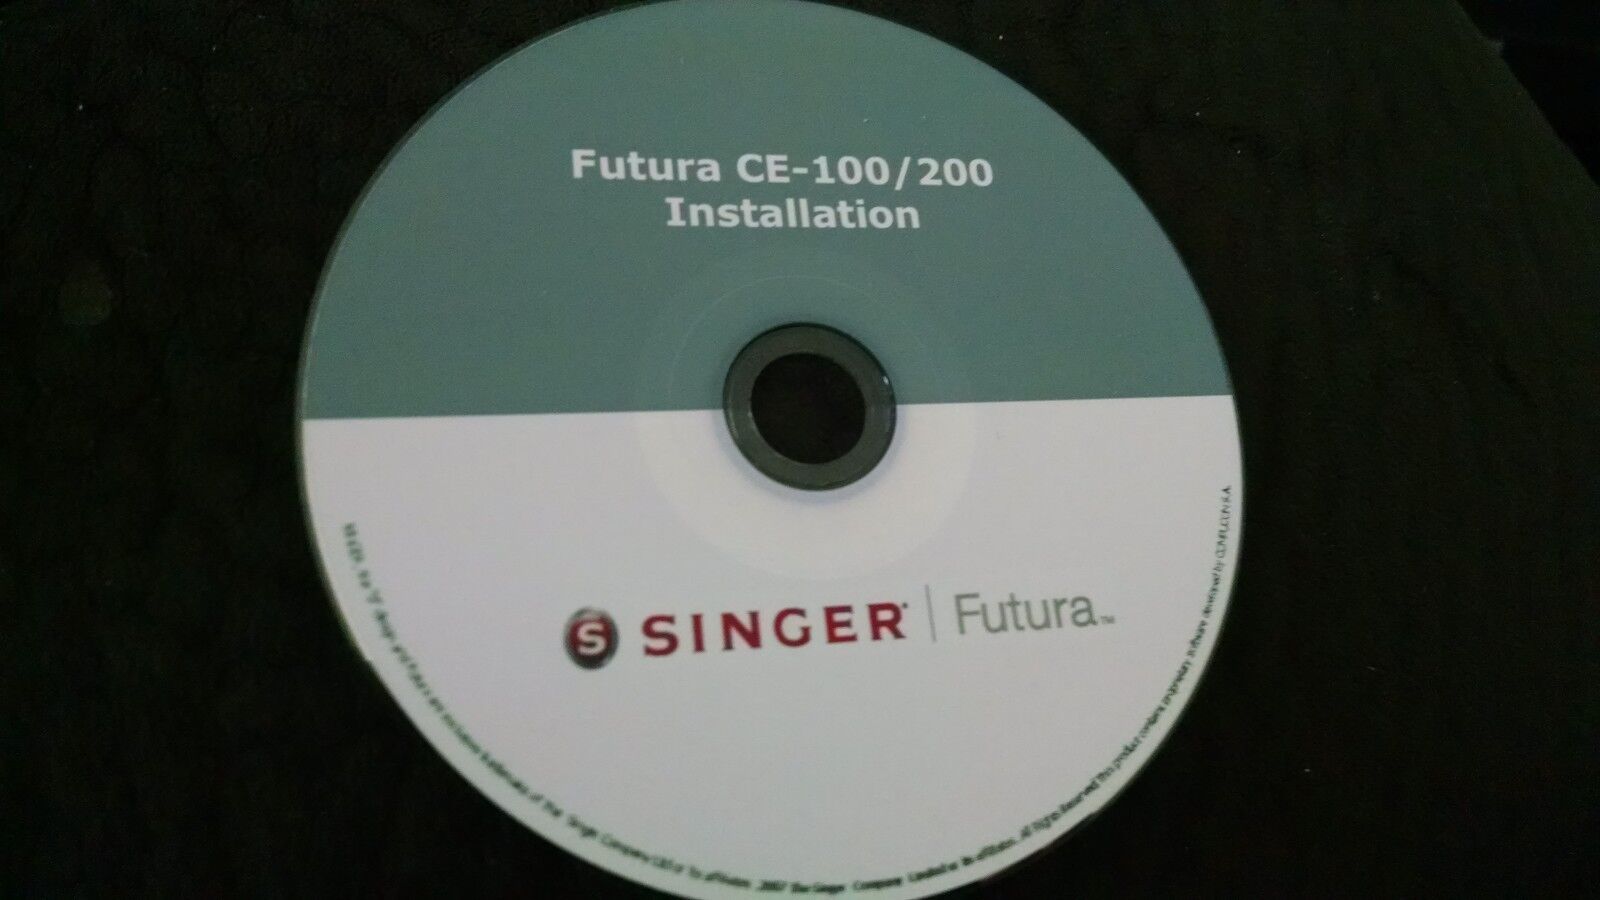 Singer Futura Installation Operating Software for the CE 100/200, 150/250/350